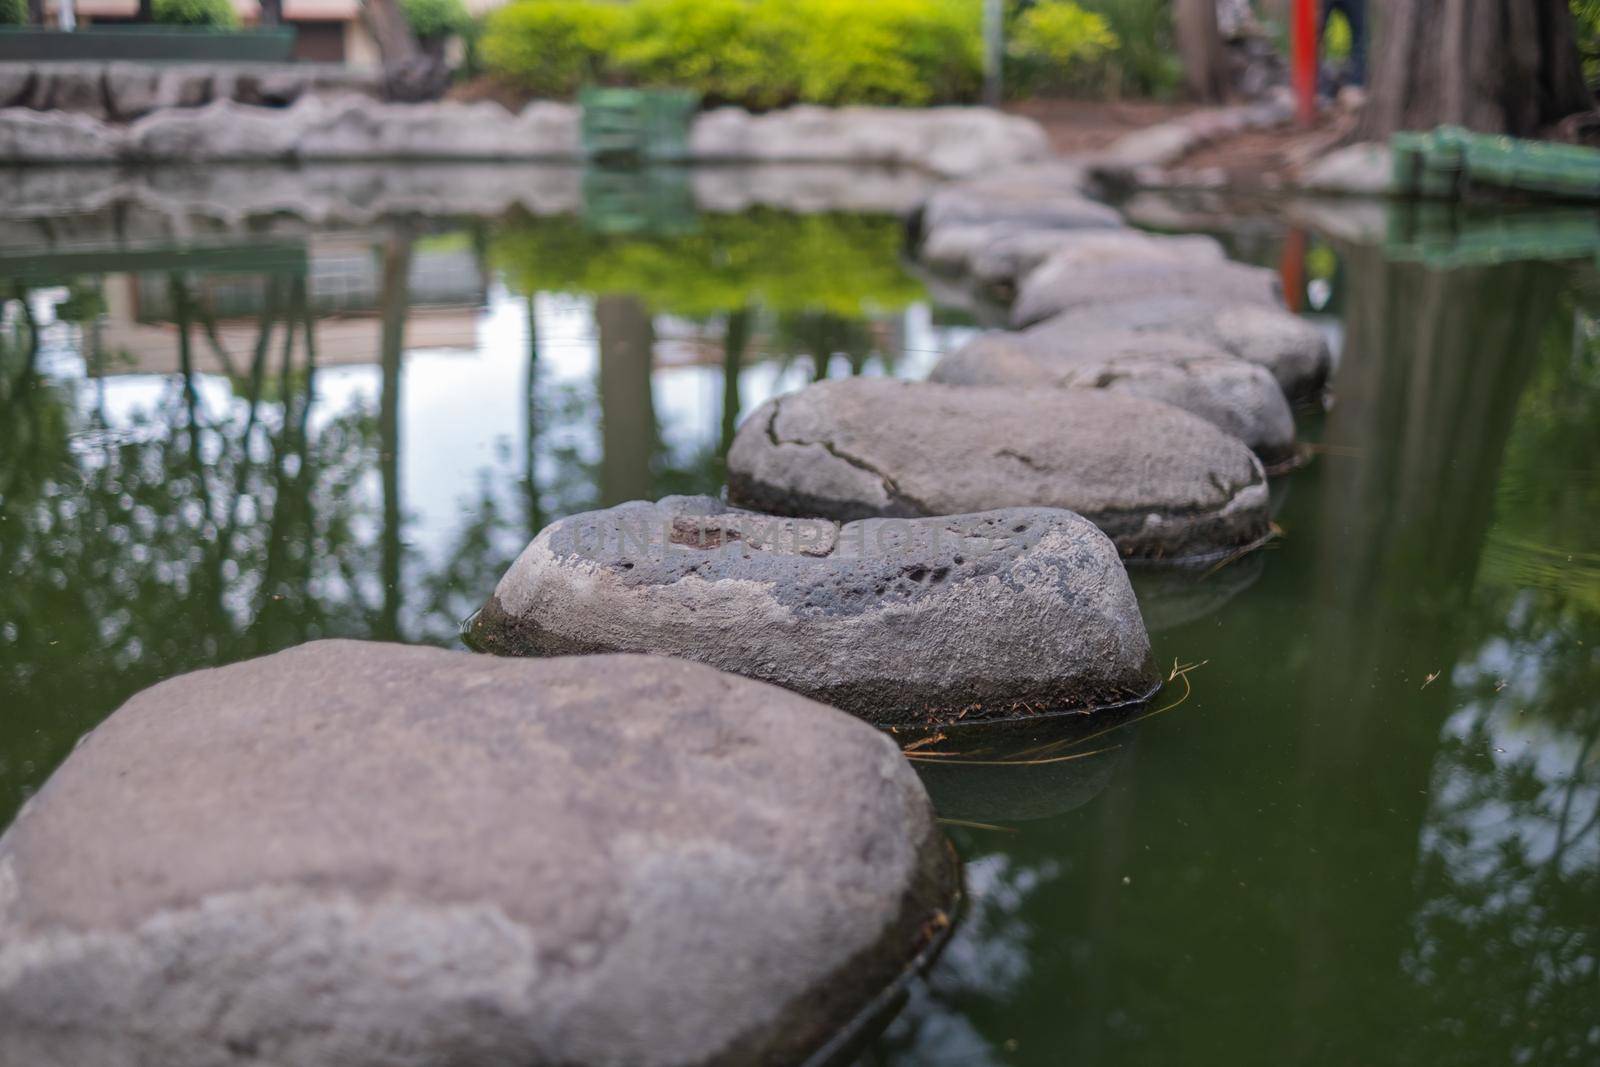 Close-up of stepping stones path on pond with blurry trees as background. Peaceful view of greenish water and rocks in Masayoshi Ohira Park. Classic architecture and outdoors